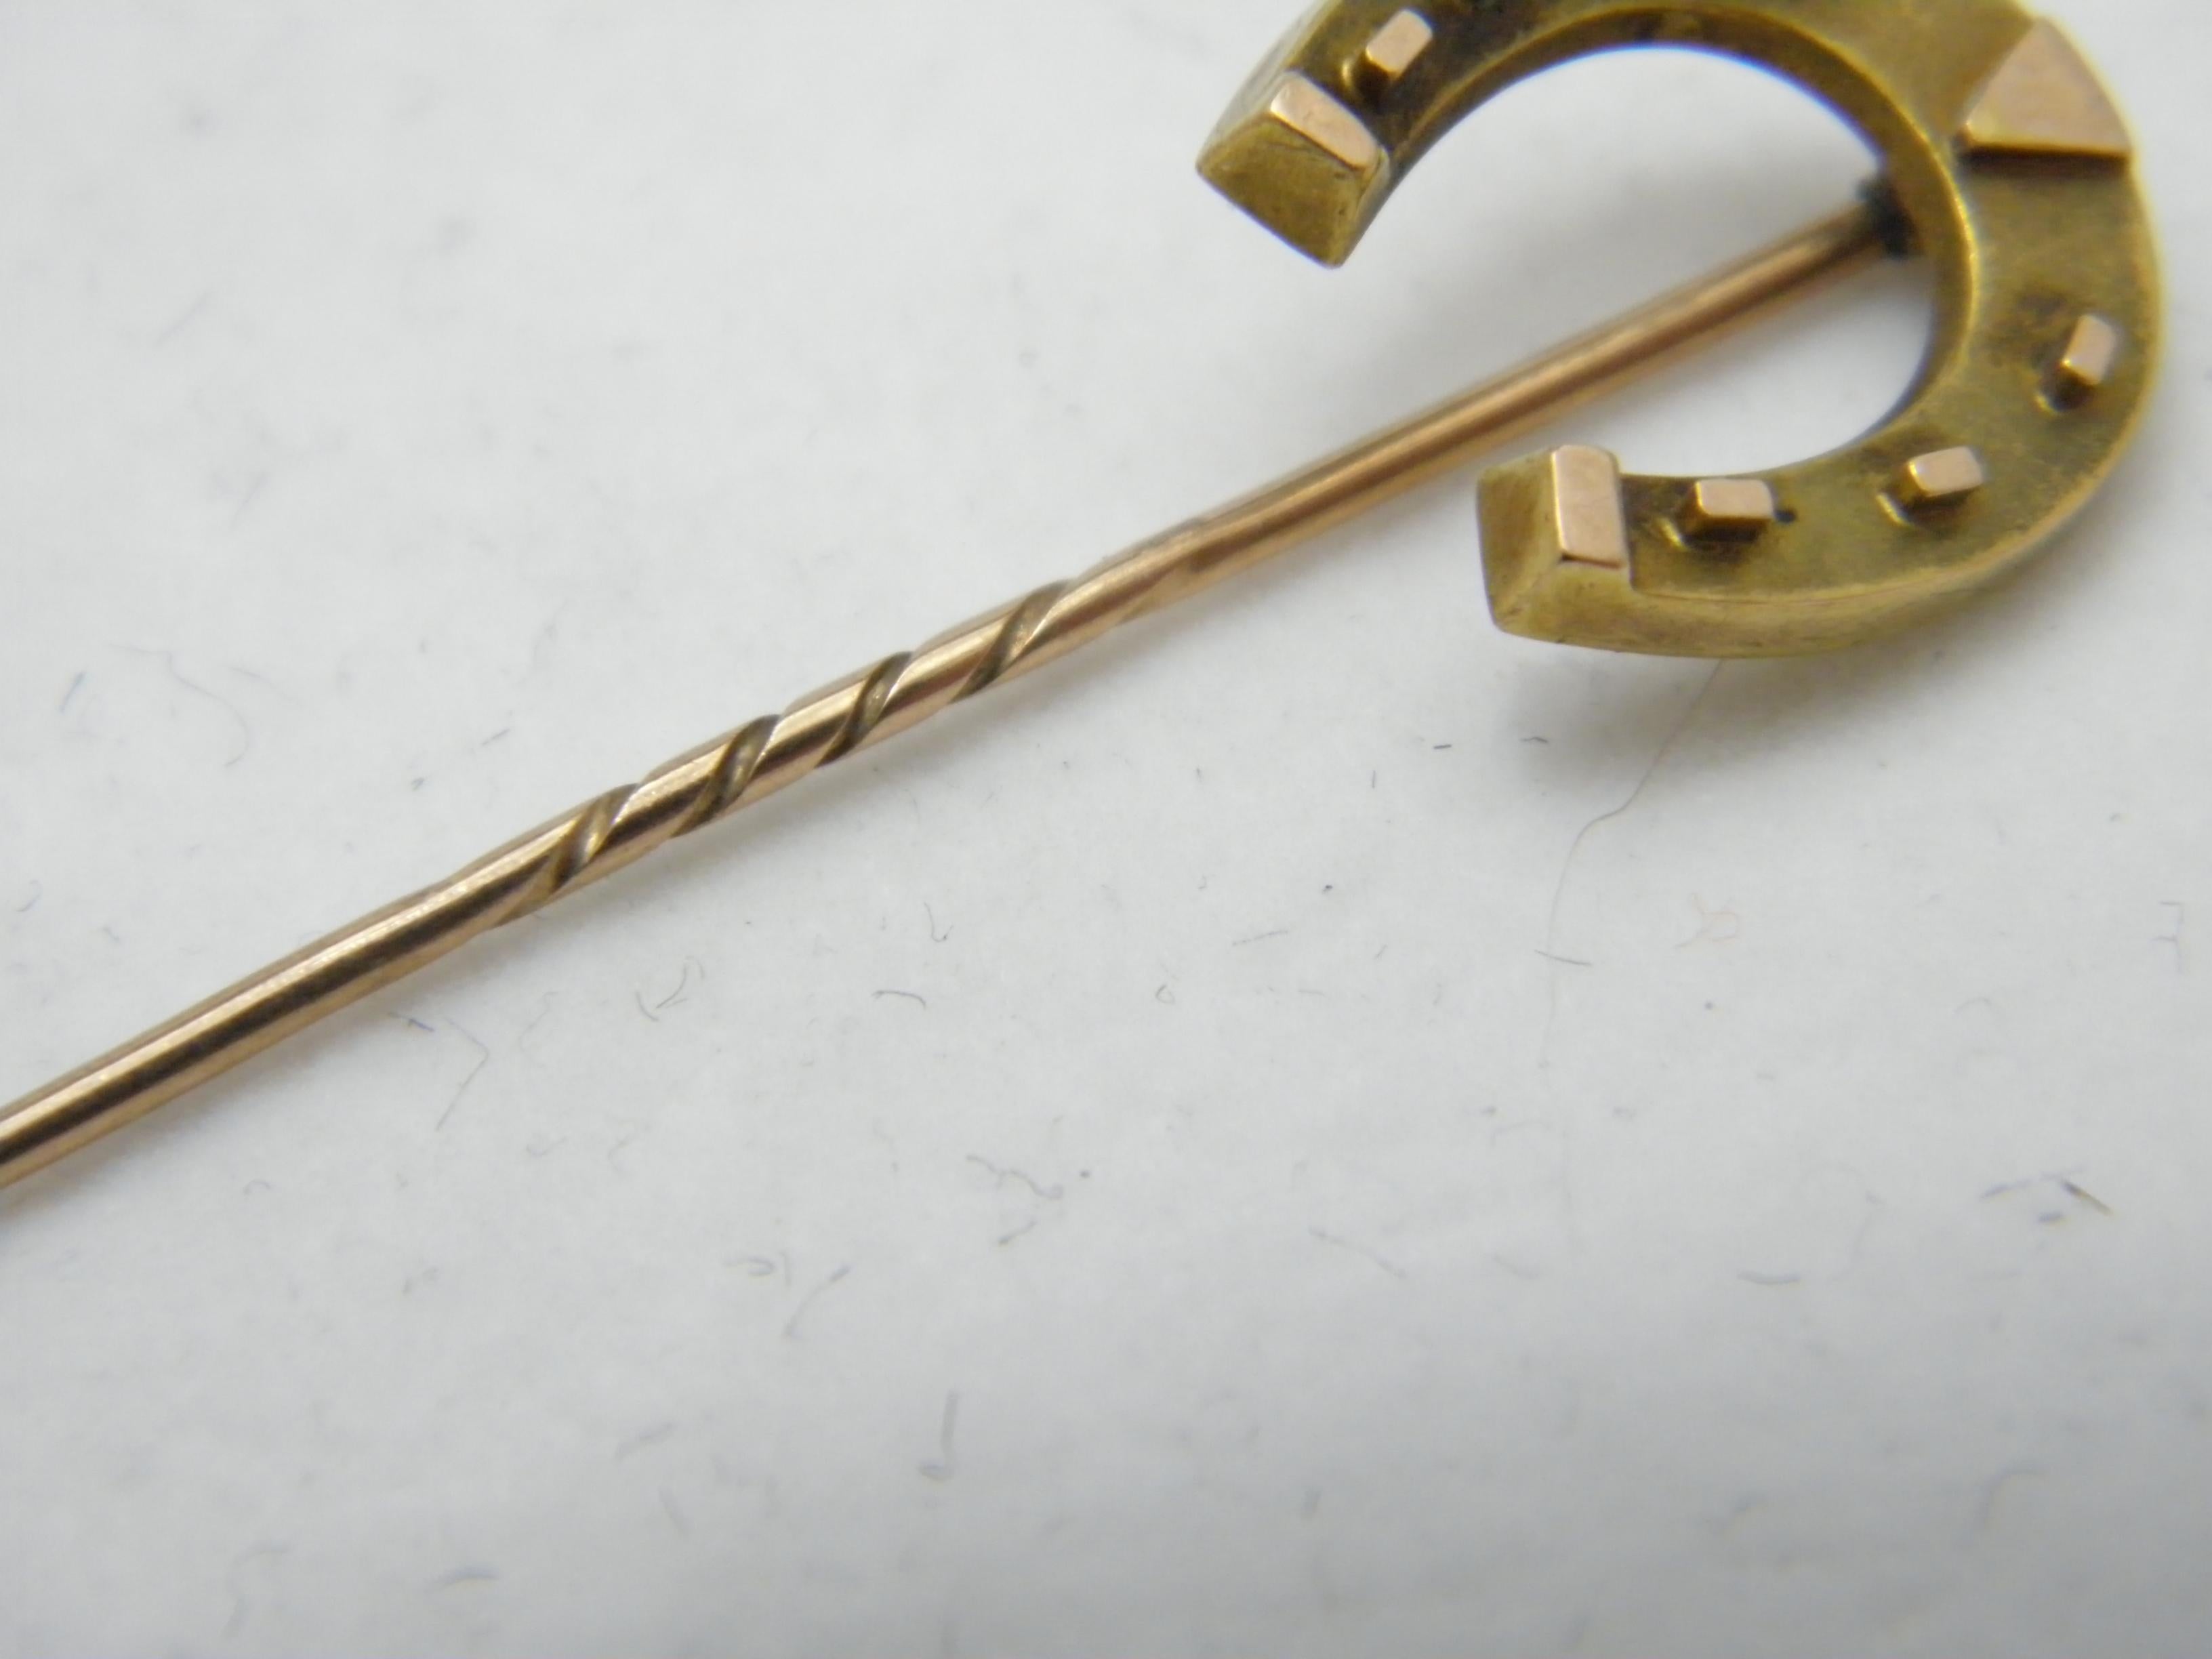 Victorian Antique 15ct Gold Lucky Horseshoe Pin Brooch c1860 Rose 625 Purity Tie Lapel Hat For Sale